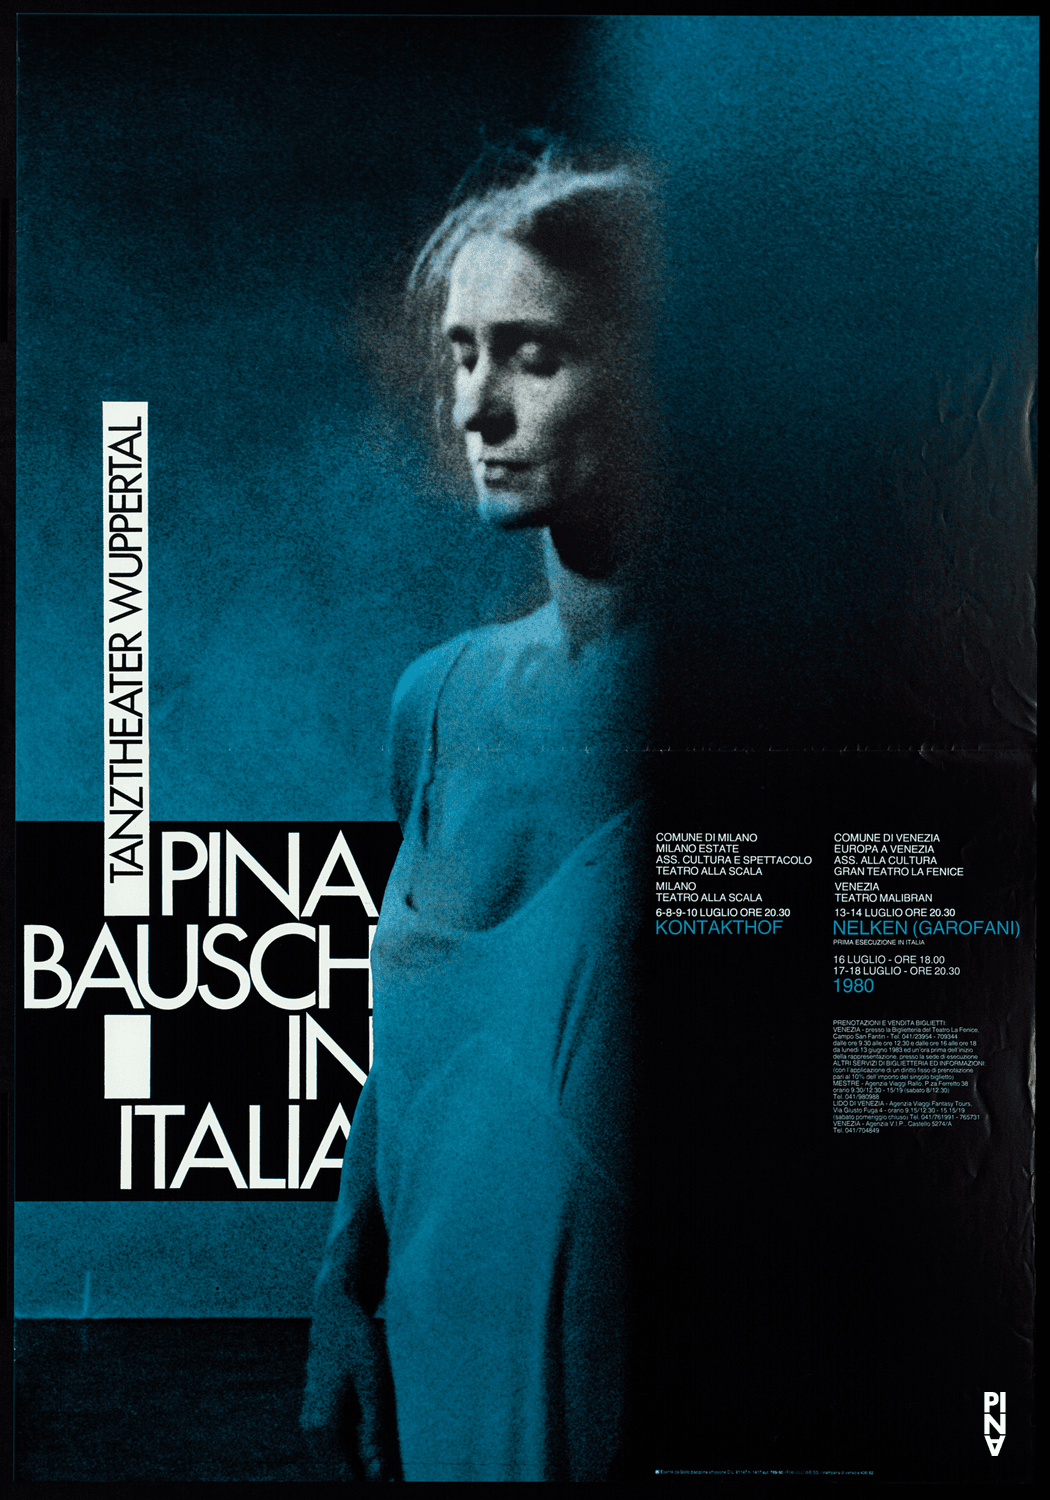 Poster for “1980 – A Piece by Pina Bausch”, “Kontakthof” and “Nelken (Carnations)” by Pina Bausch in Milan and Venice, 07/06/1983 – 07/18/1983